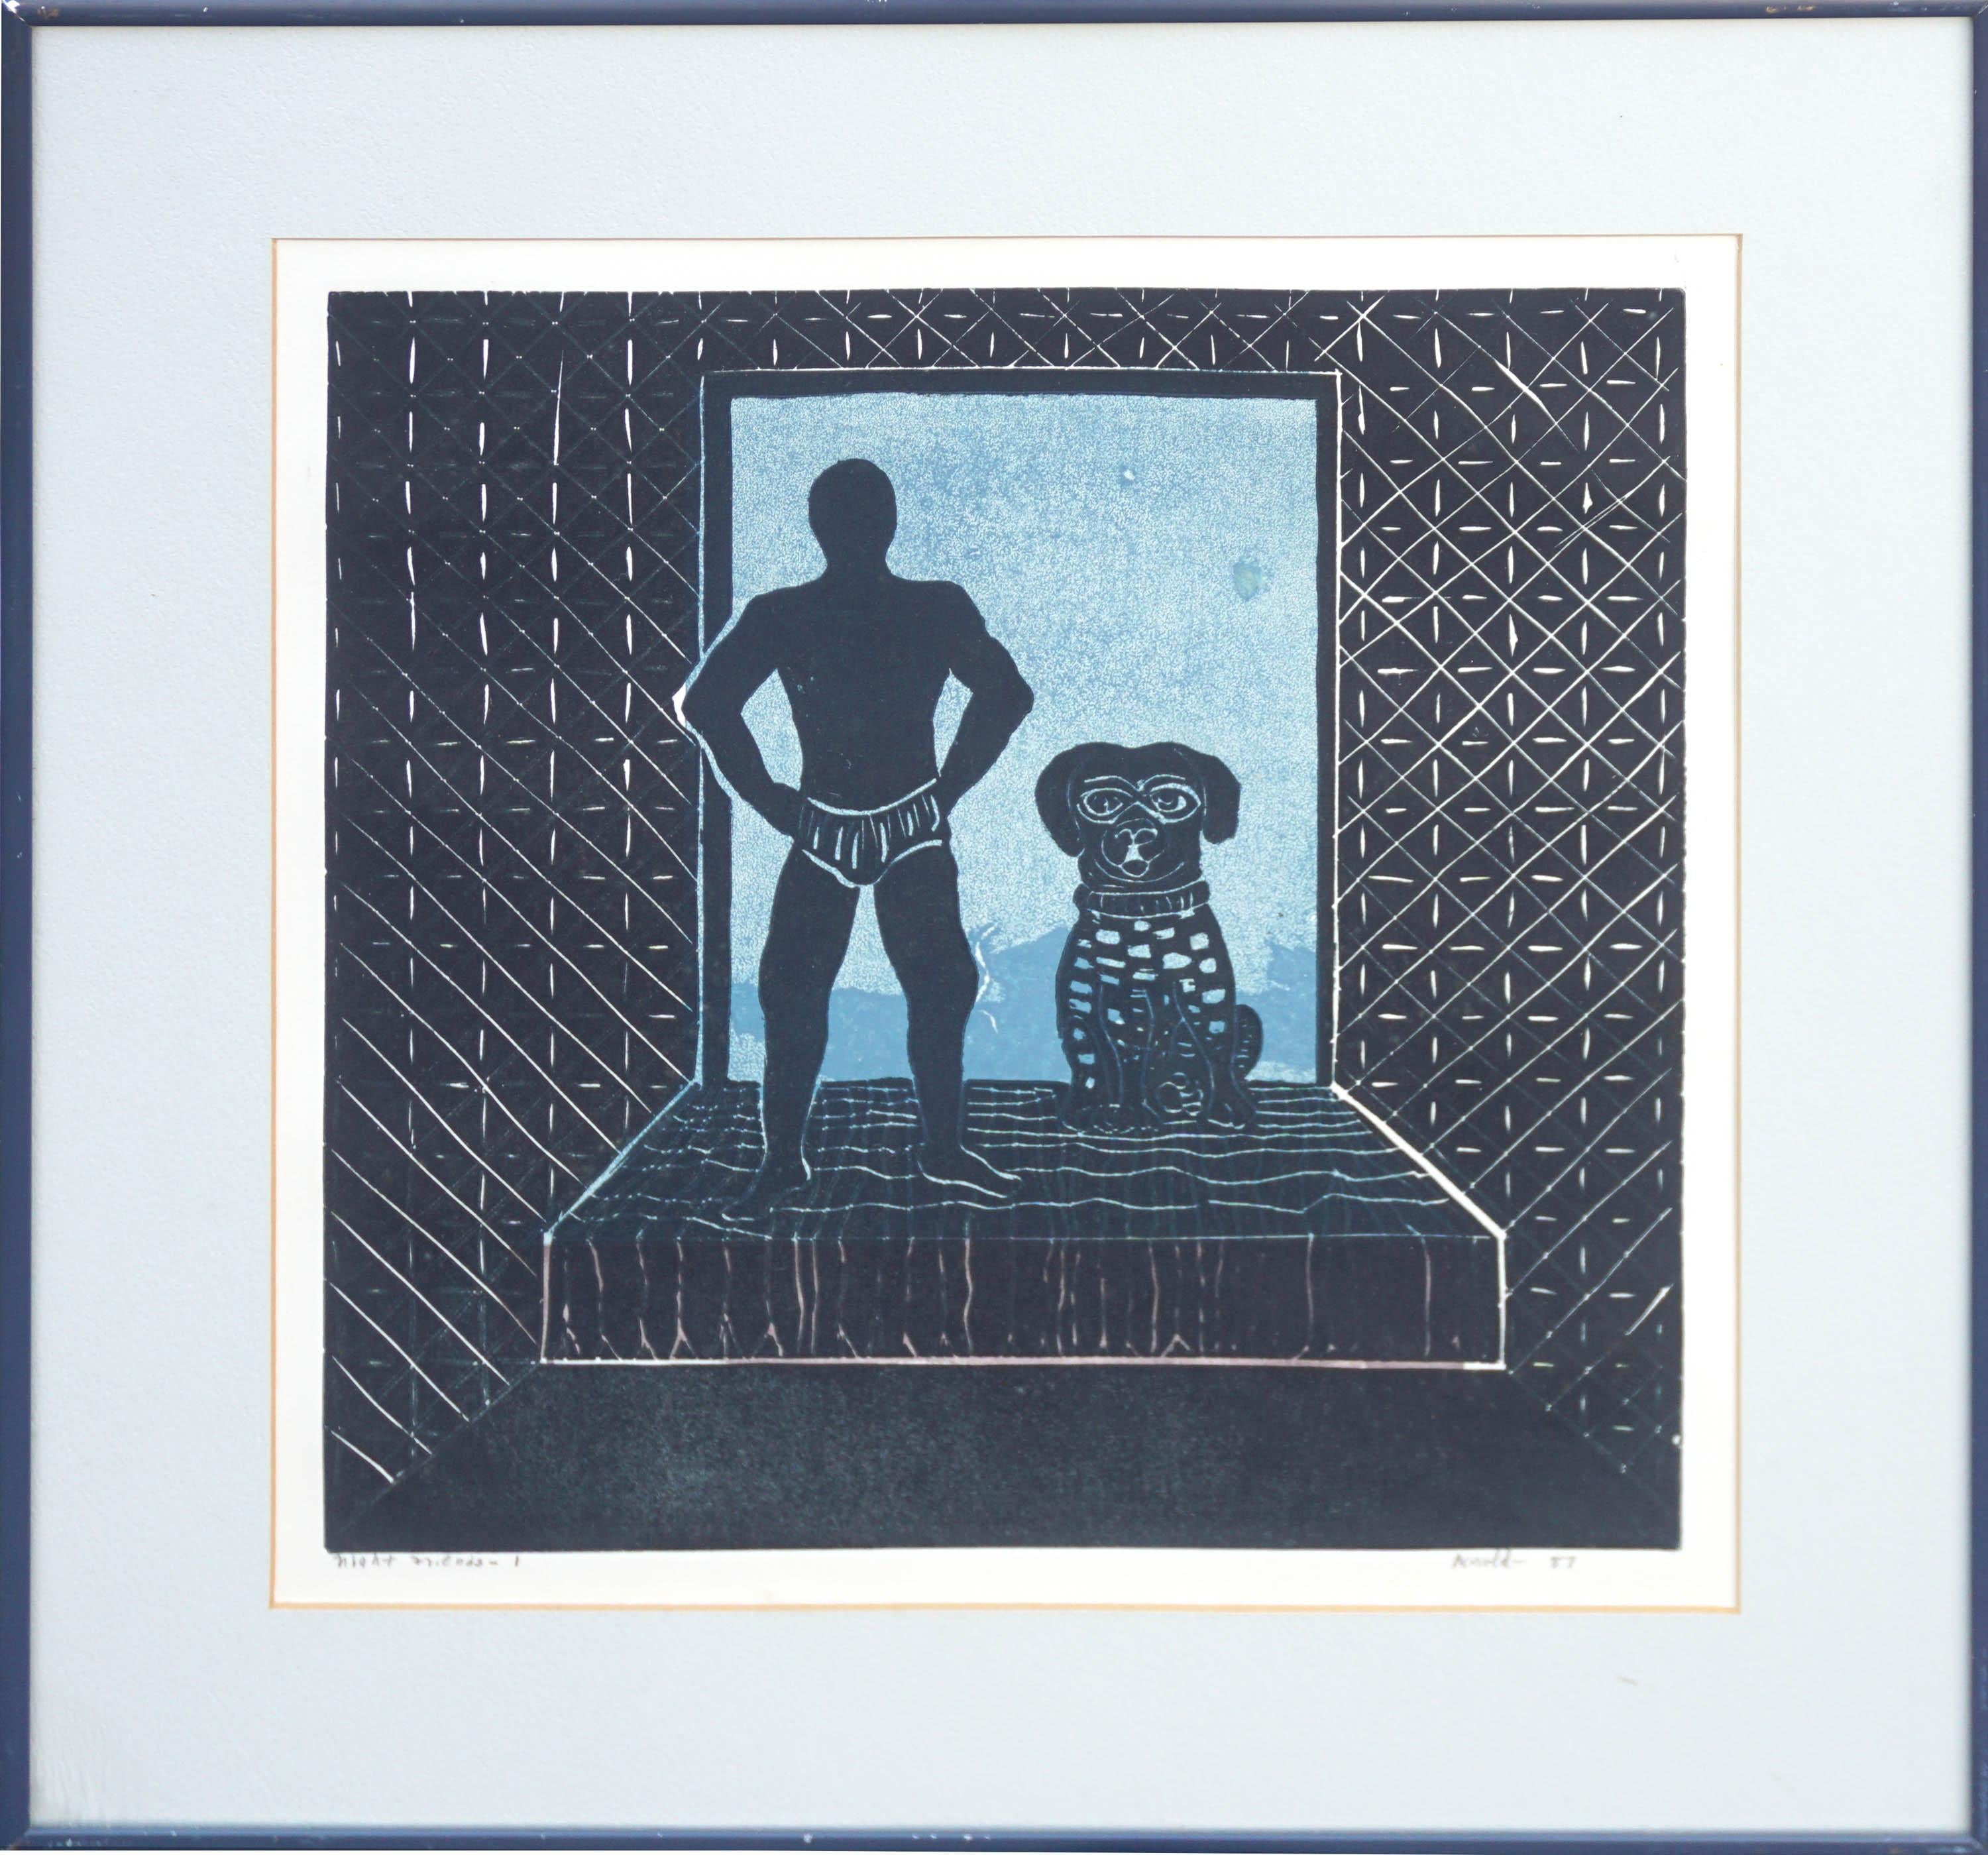 Wonderful lino-cut of man and dog titled "Night Friends 1" by Ralph Moffett Arnold (American, 1928-2006), 1987. Titled on left edge and on verso; signed and dated on right edge and on label on verso. Presented in mat under glass in dark grey frame.